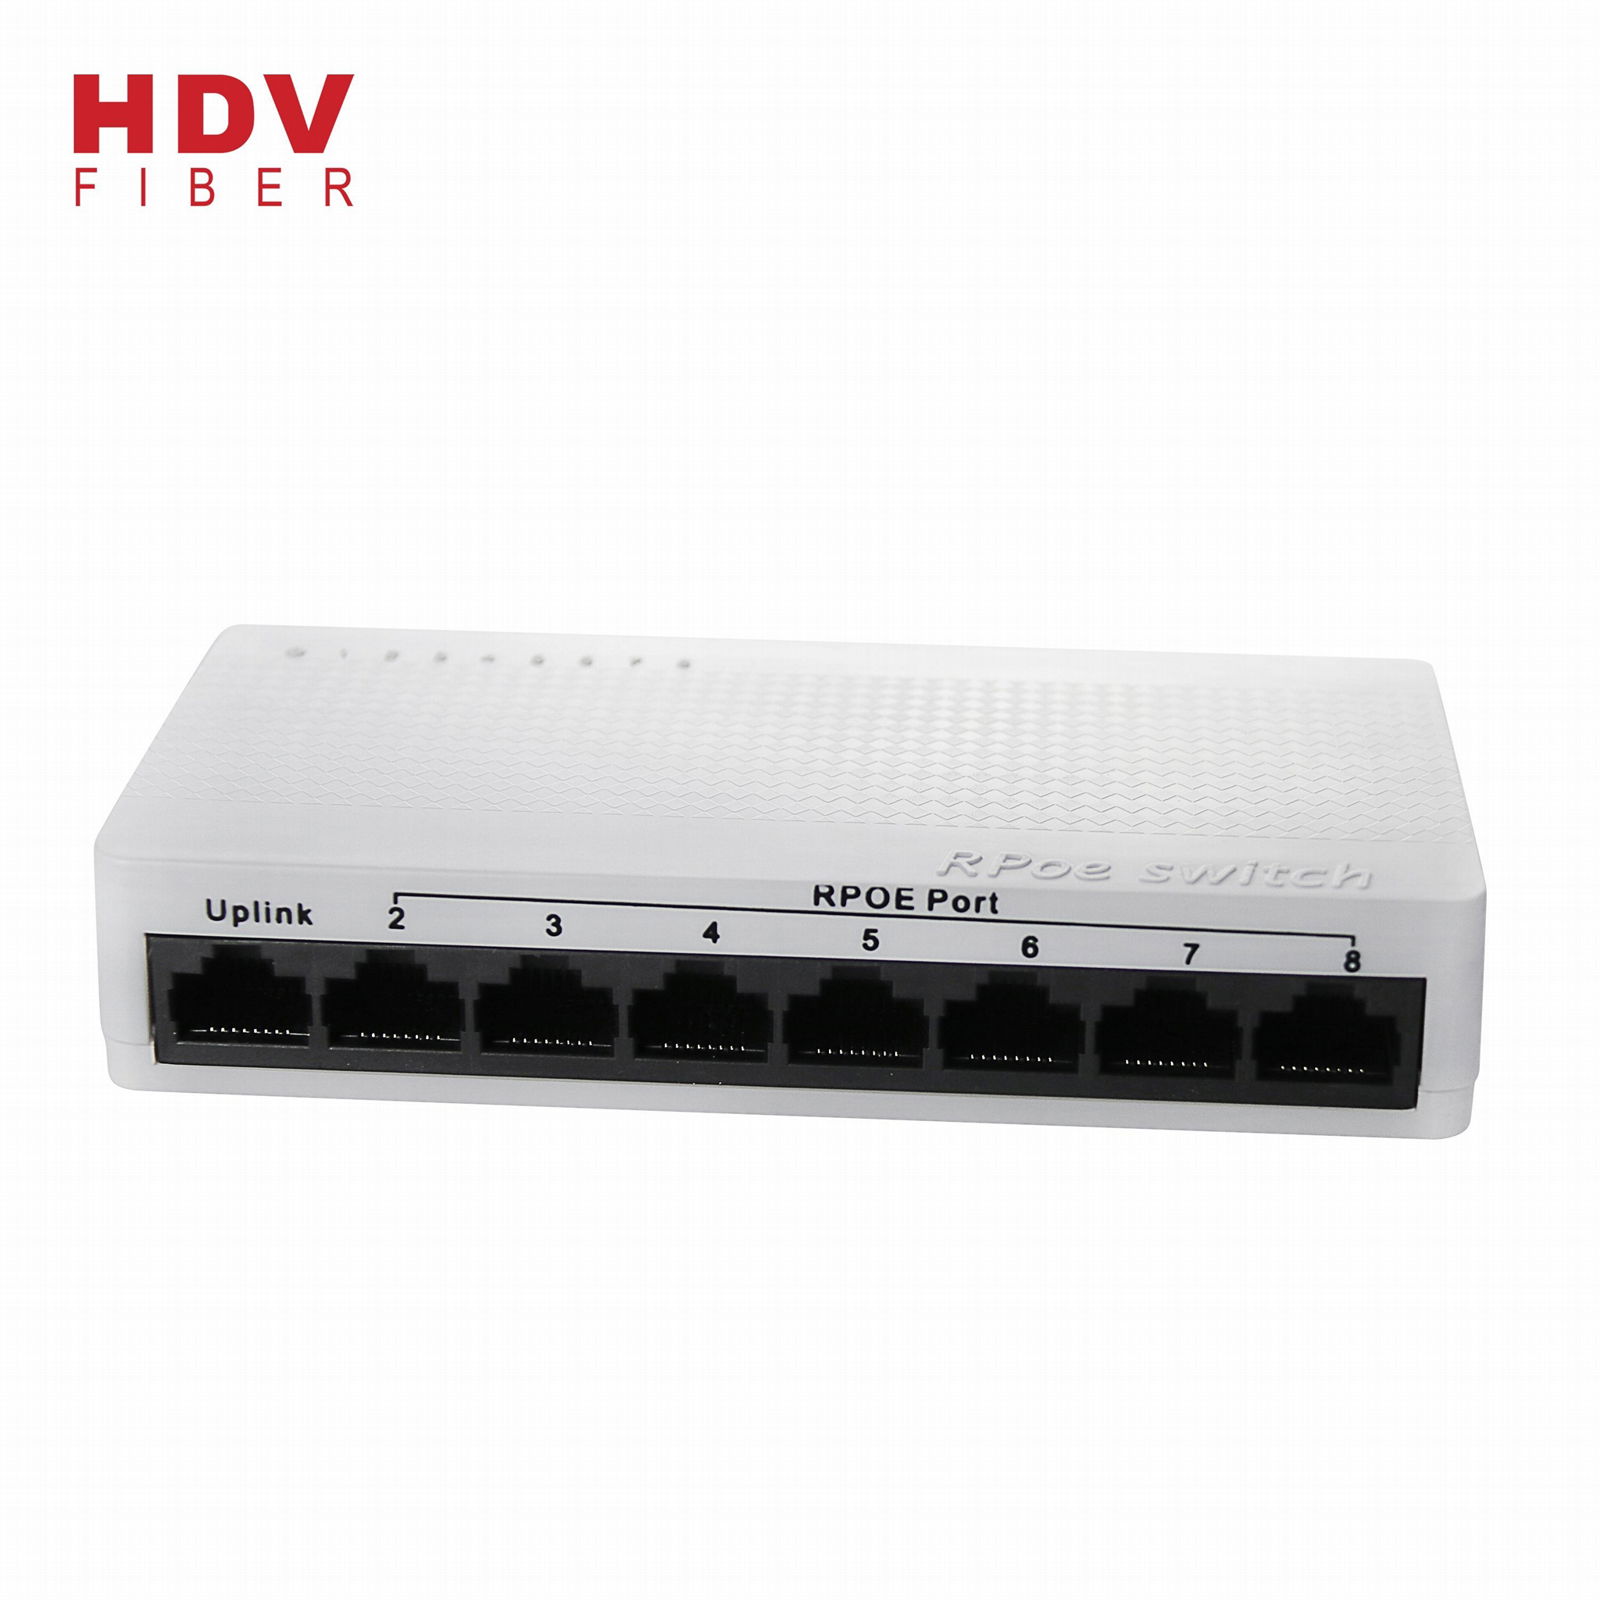 8 Port 10/100Mbps Network Reverse Switch with POE Function